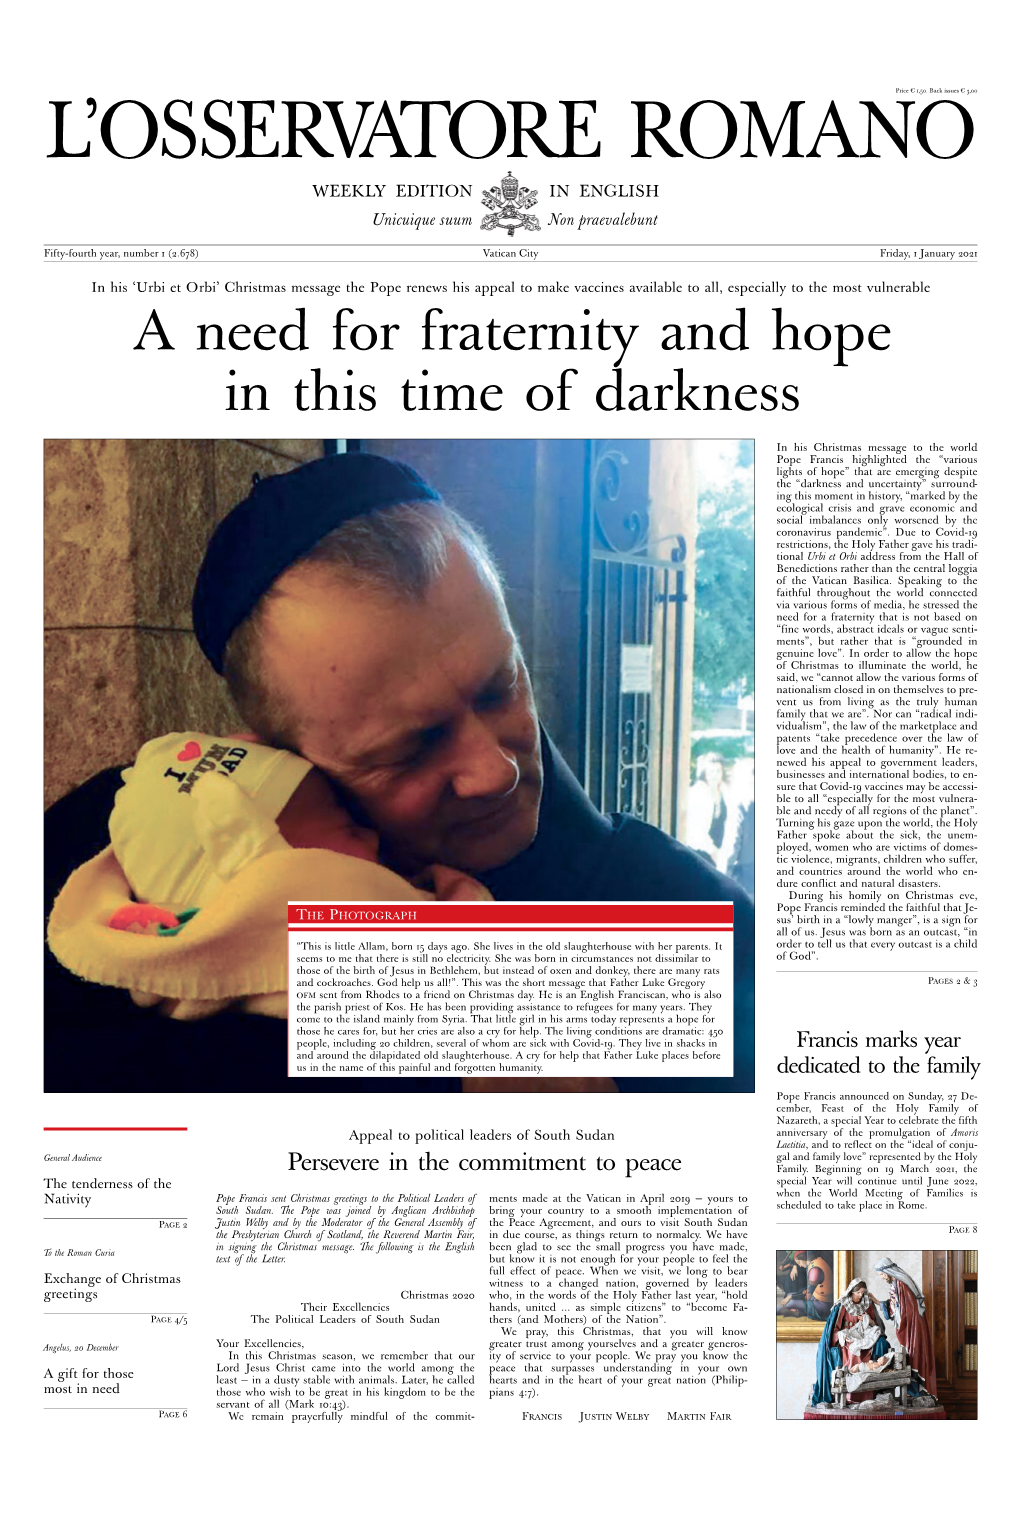 A Need for Fraternity and Hope in This Time of Darkness